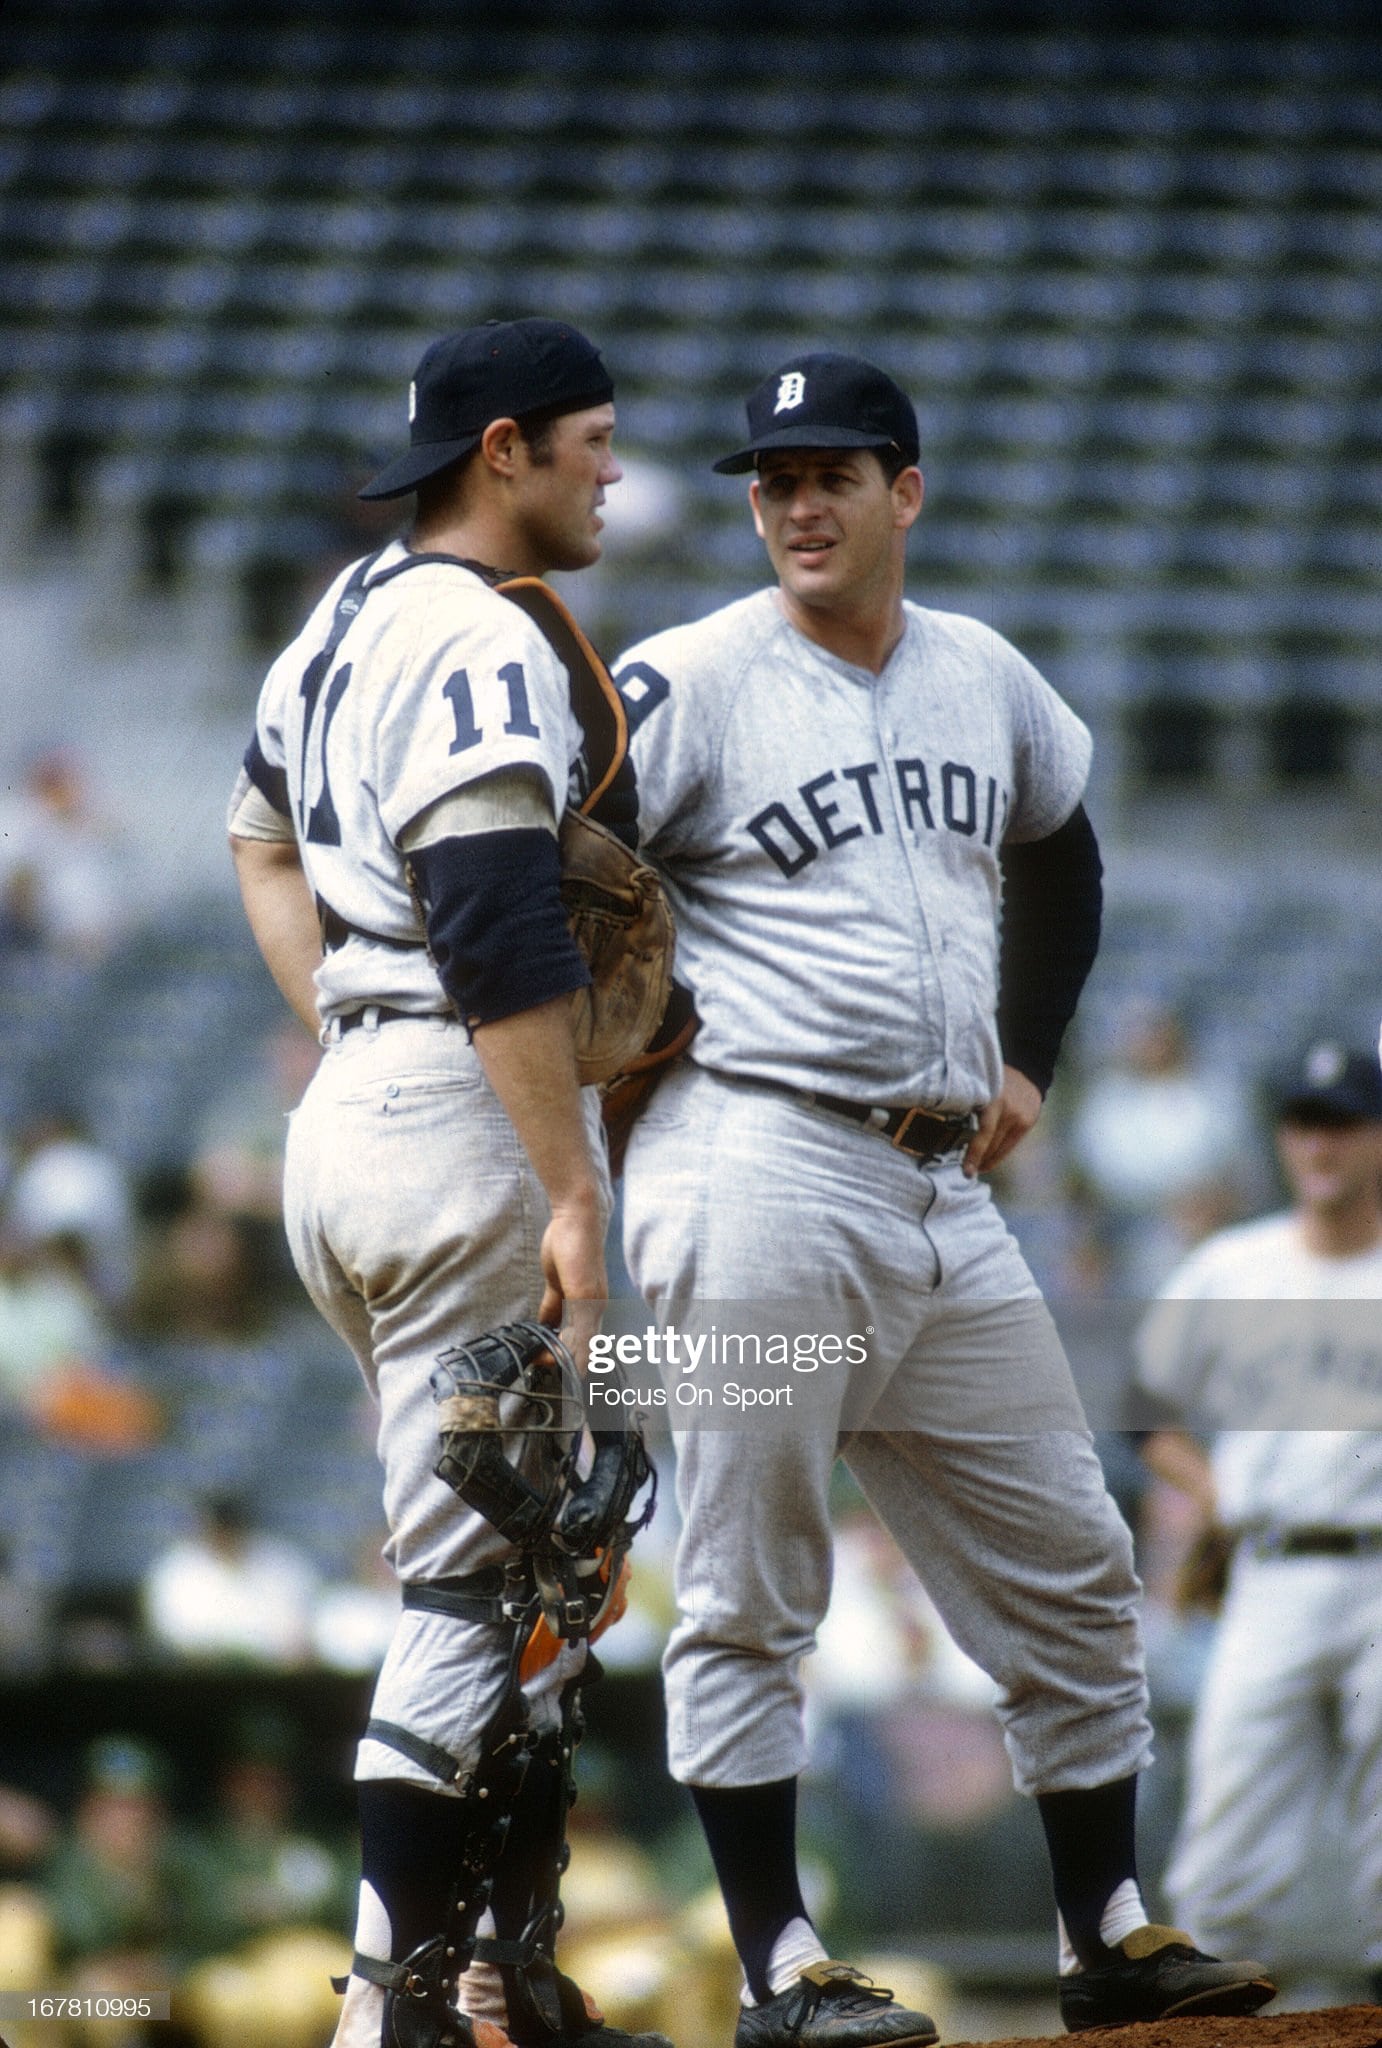 Bill Freehan and Mickey Lolich